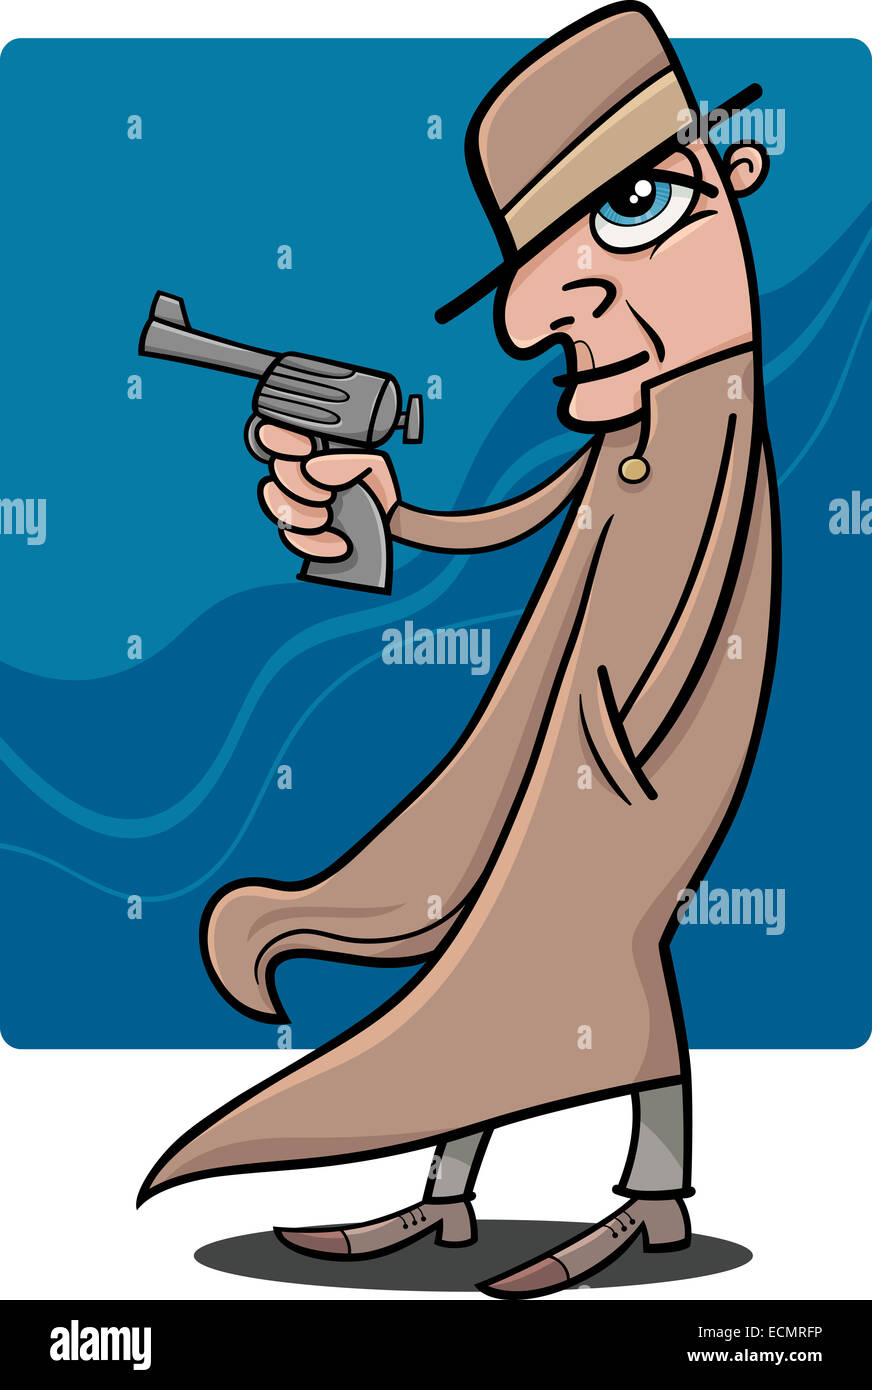 Cartoon Illustration of Detective or Gangster with Gun Stock Photo